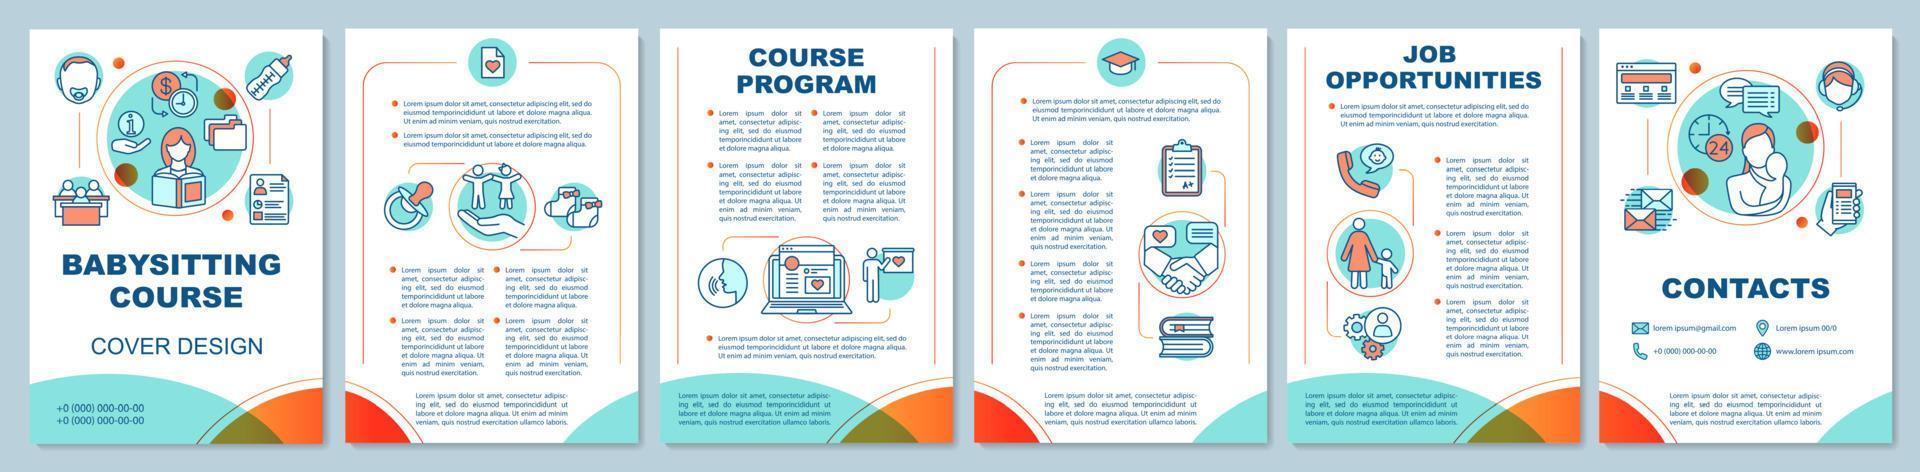 Babysitting course in bright colors brochure template layout vector